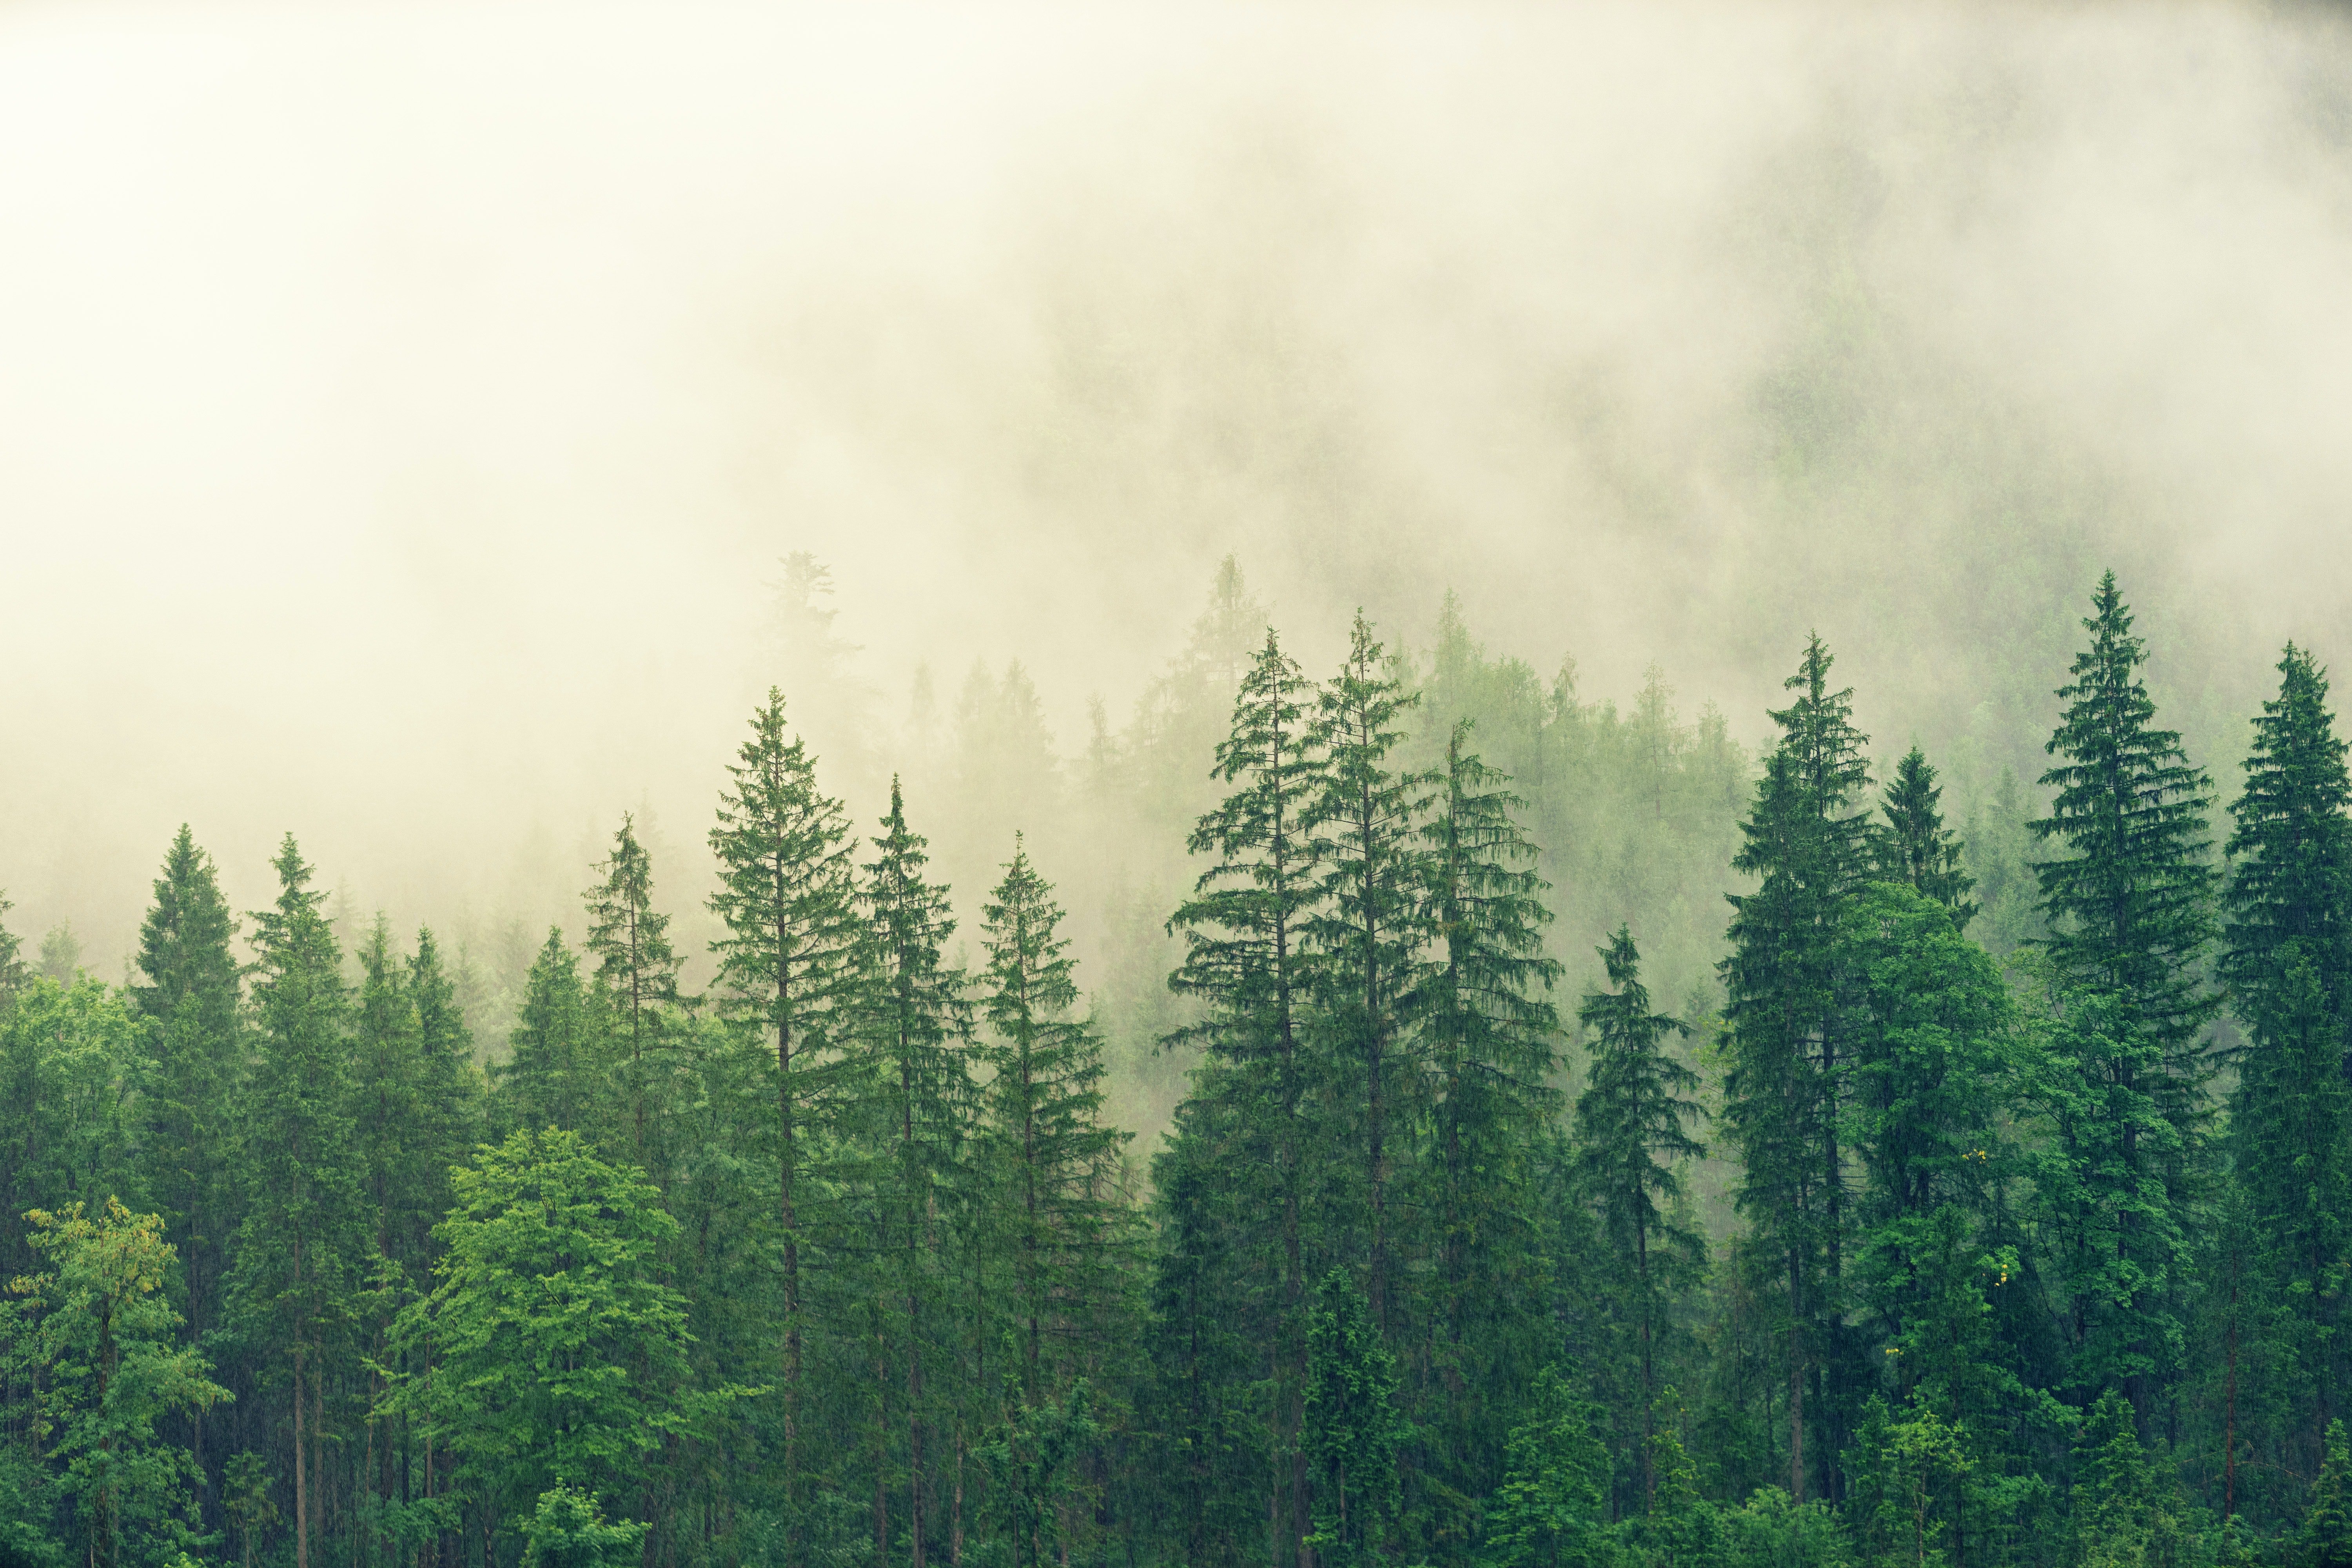 Pictured - A forest covered in white fog | Source: Pexels 